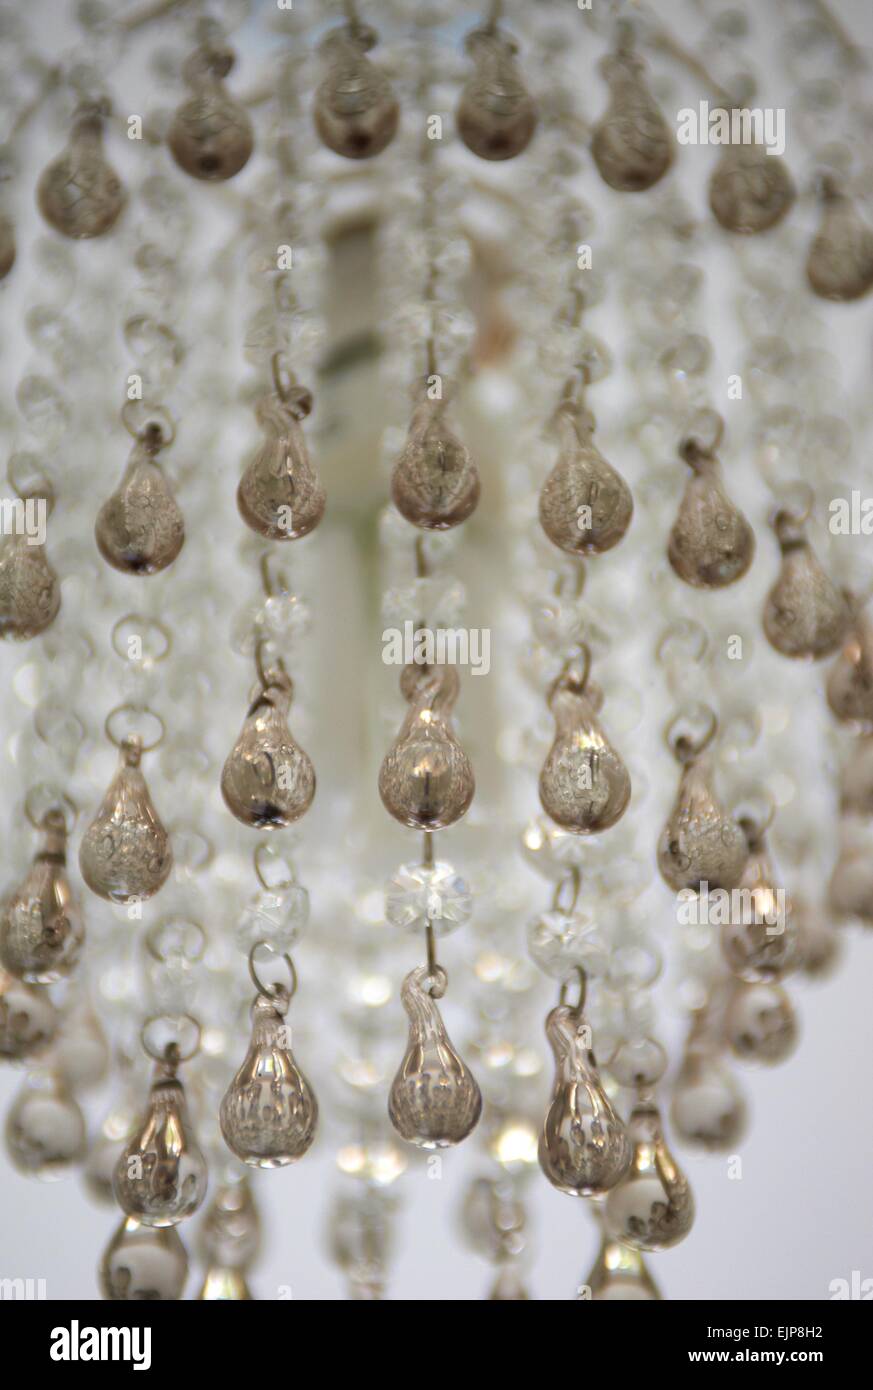 chandelier light lamp shade house glow bright glass bejeweled jewels crystal sparling elegant sparkle twinkle diffract difractio Stock Photo